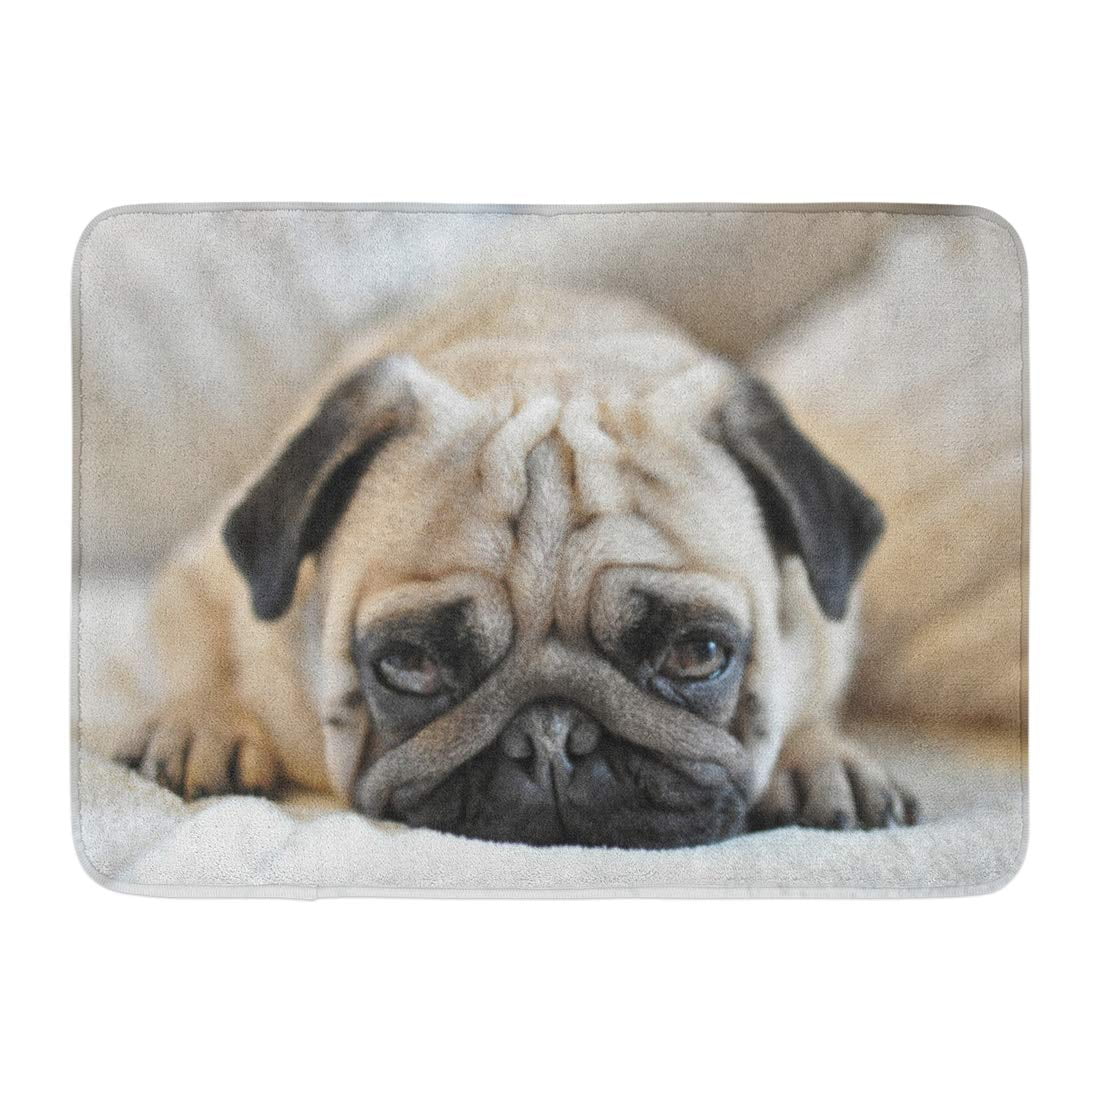 Fiddler's Elbow DOORMAT--18 X 27--TWO PUGS non-skid rubber backed, 